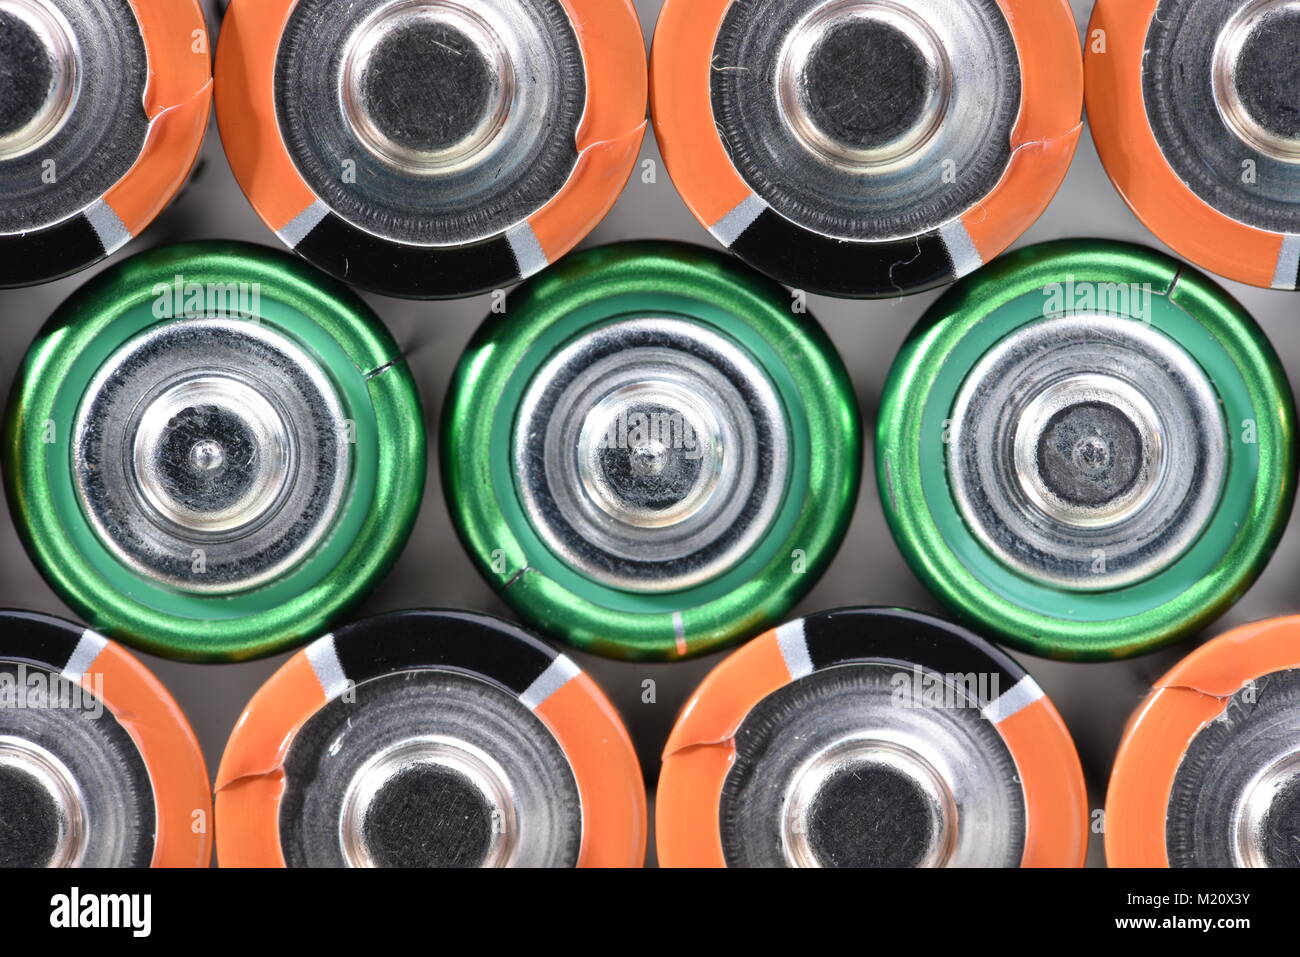 Group of AA batteries top view Stock Photo